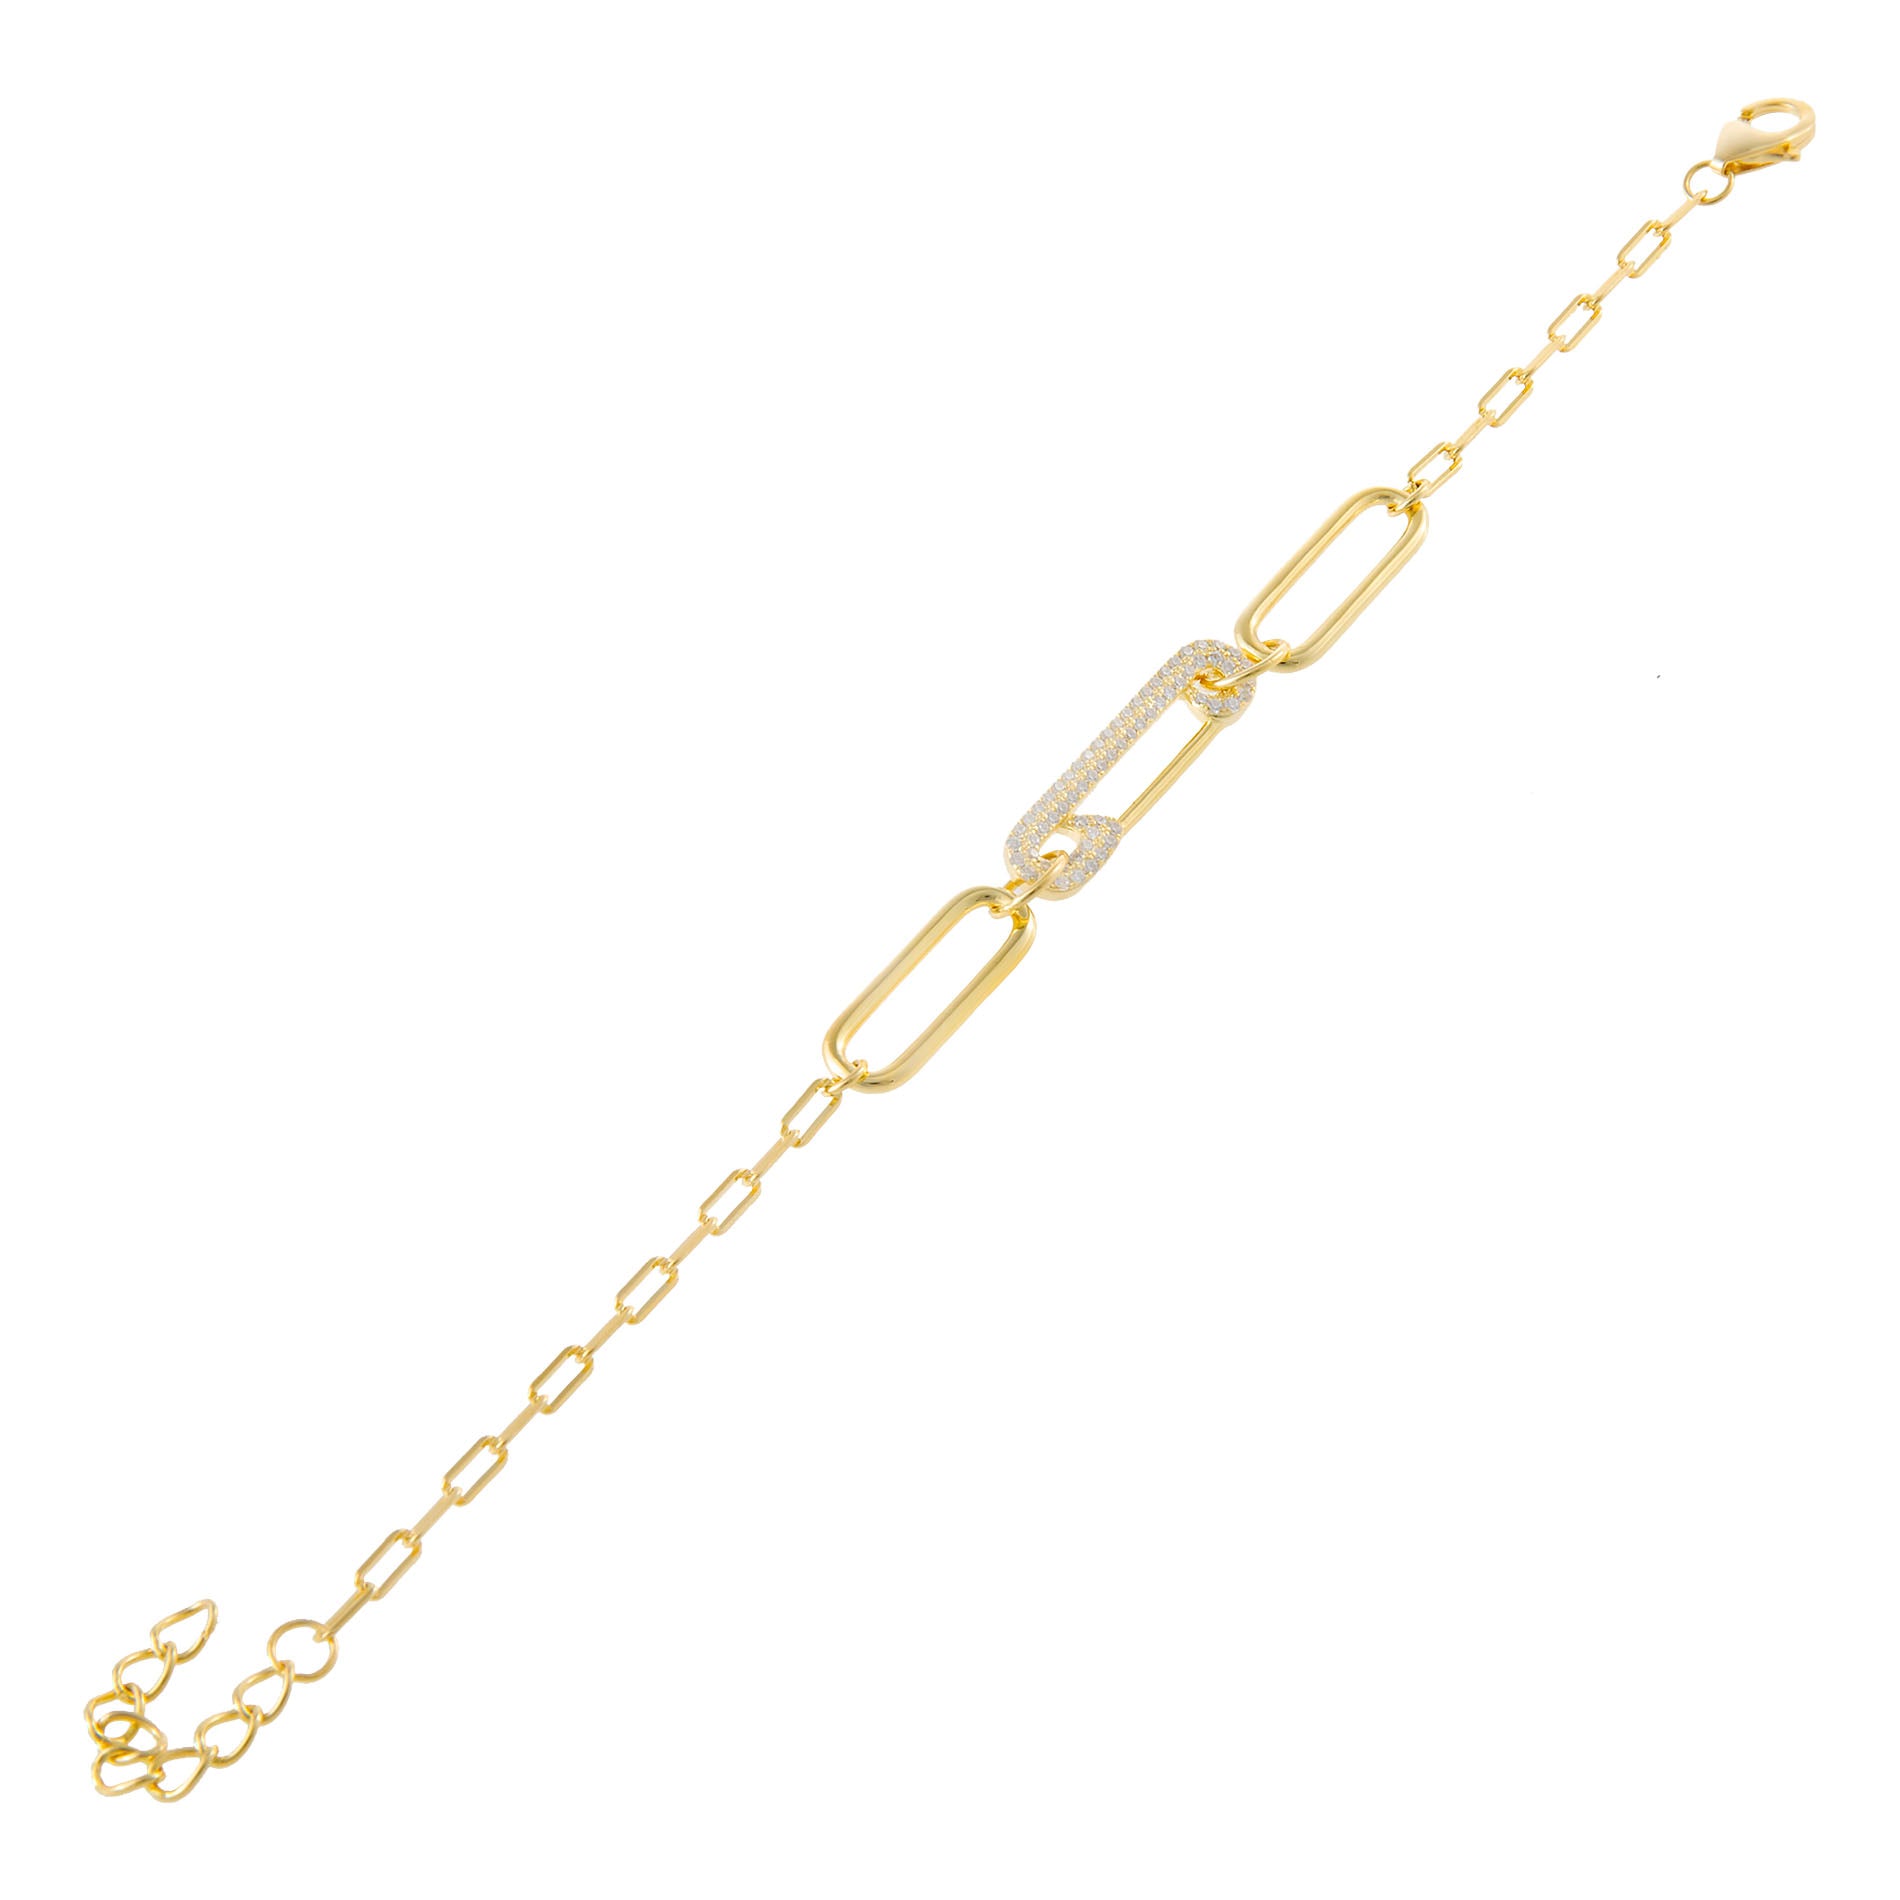 Chain Link Gold Curb Safety Pin Bracelets Bangles For Women Chunky Cuban  Wrist Cz Pave Wholesale Jewelry Drop Delivery Otjlf From Cjlove, $6.79 |  DHgate.Com